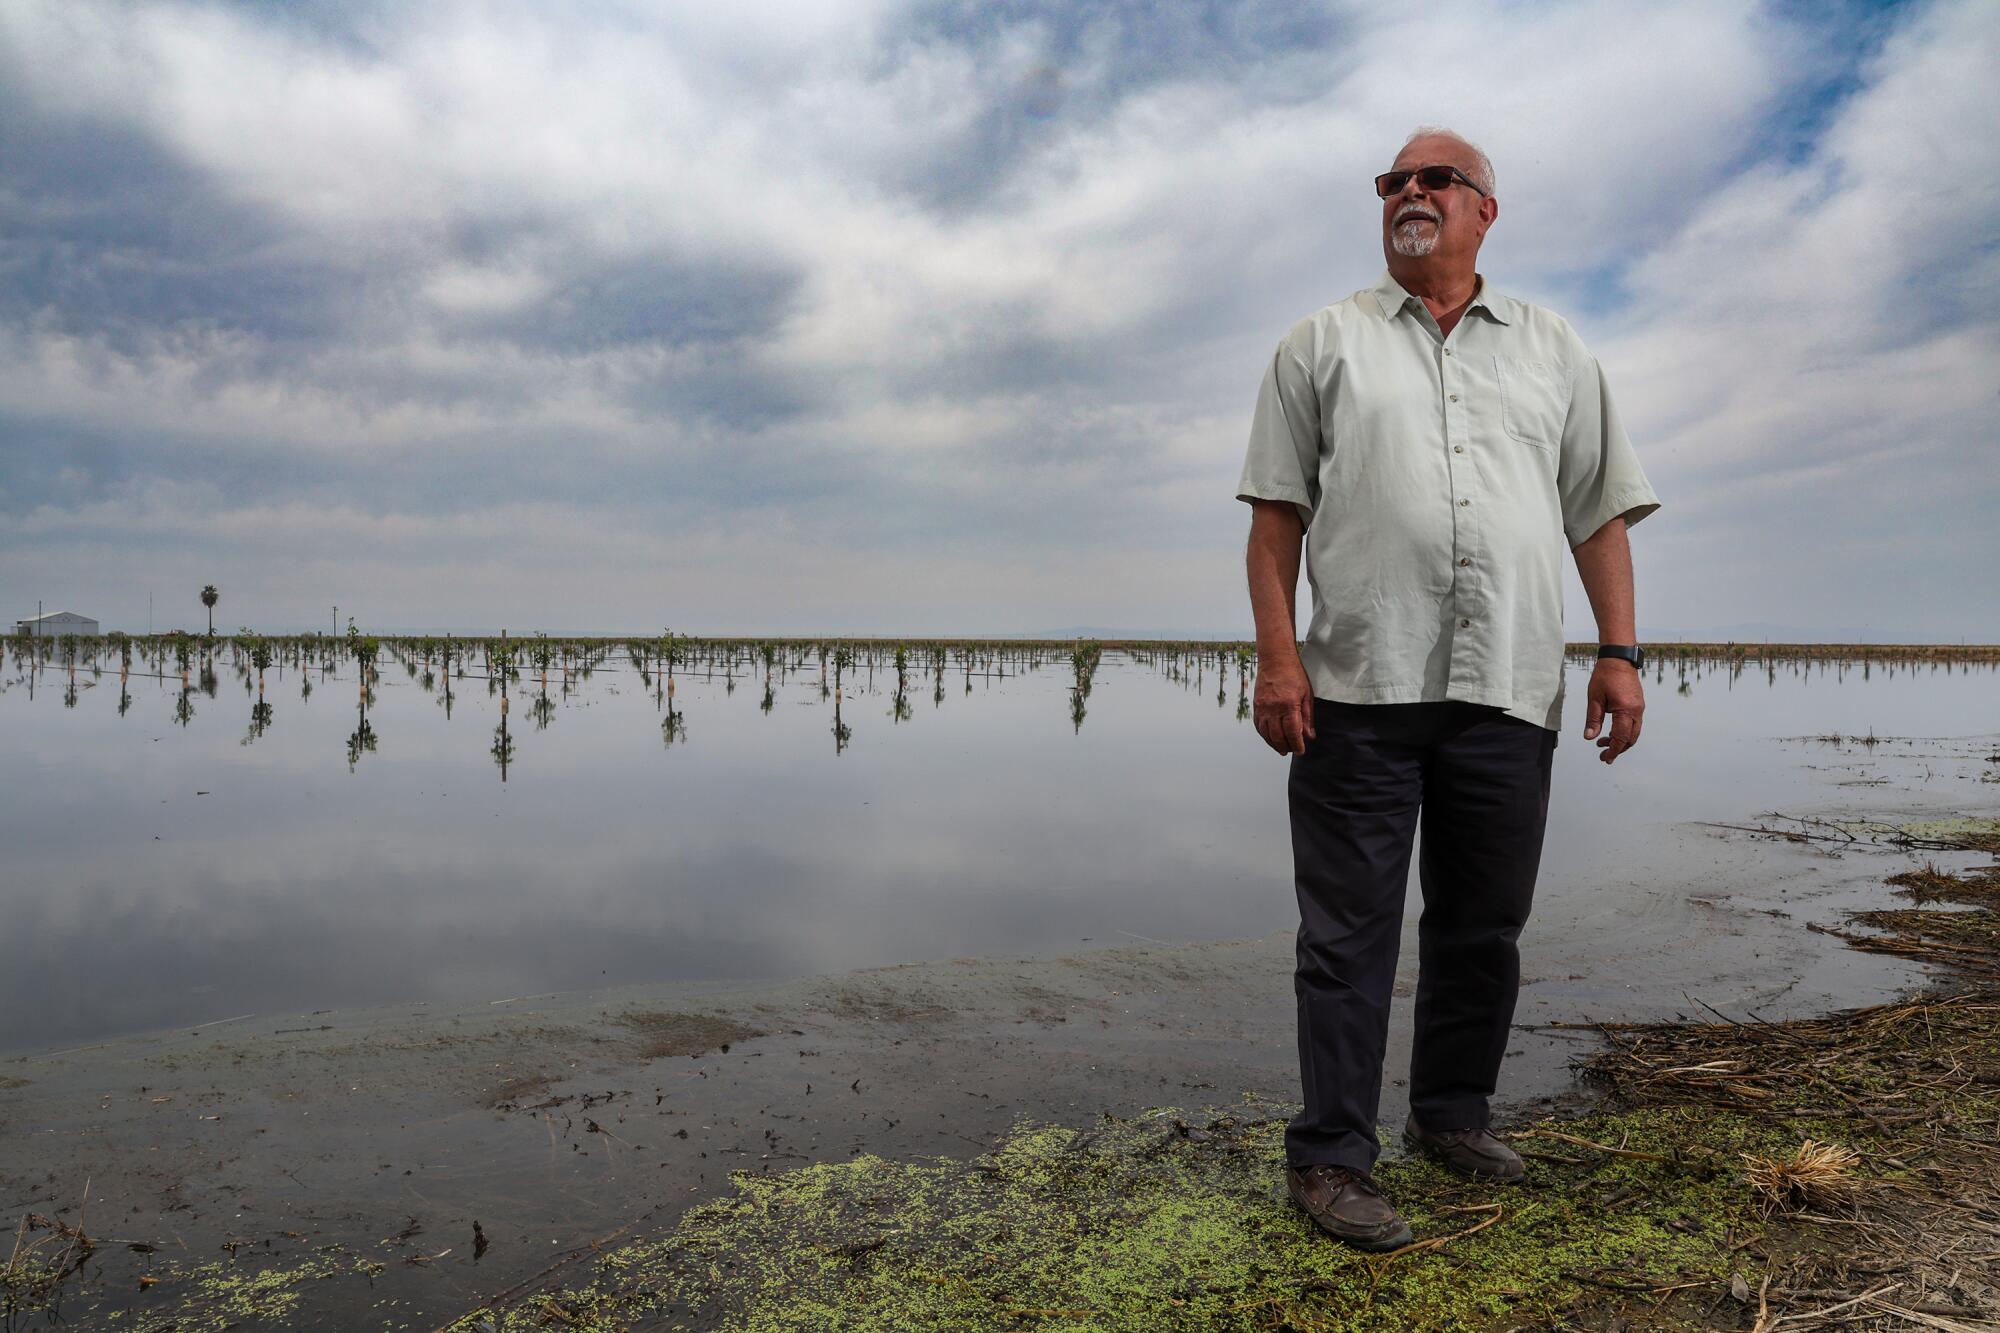 A man stands with a flooded pistachio orchard behind him.